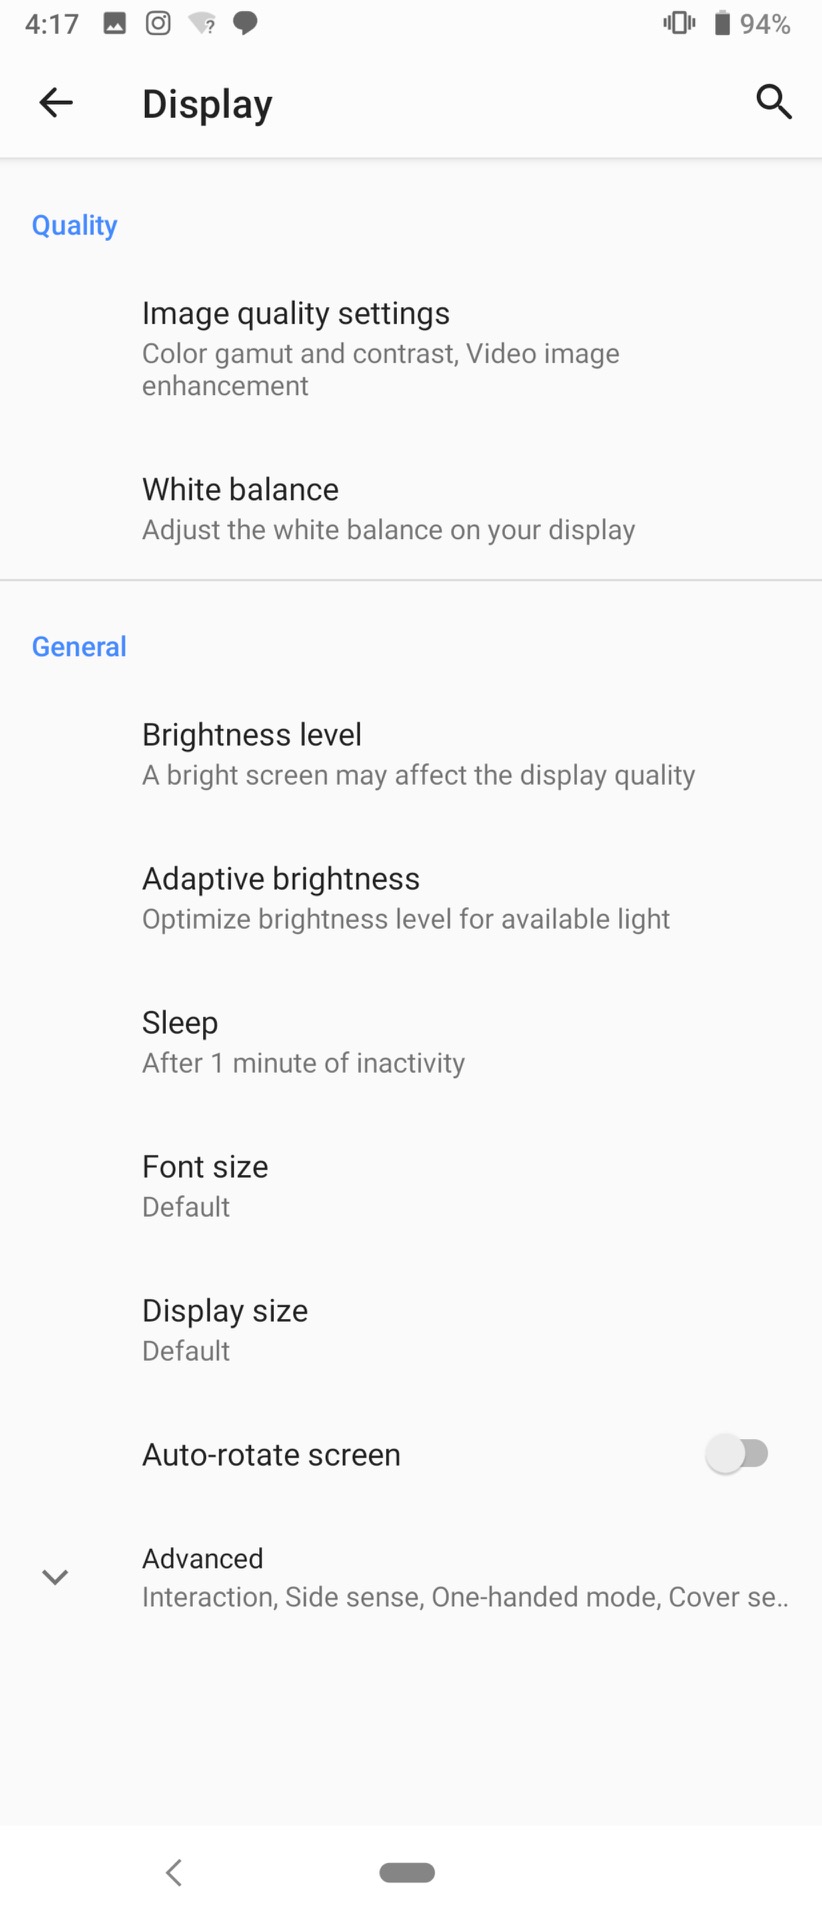 Sony Xperia 1 Review Display settings